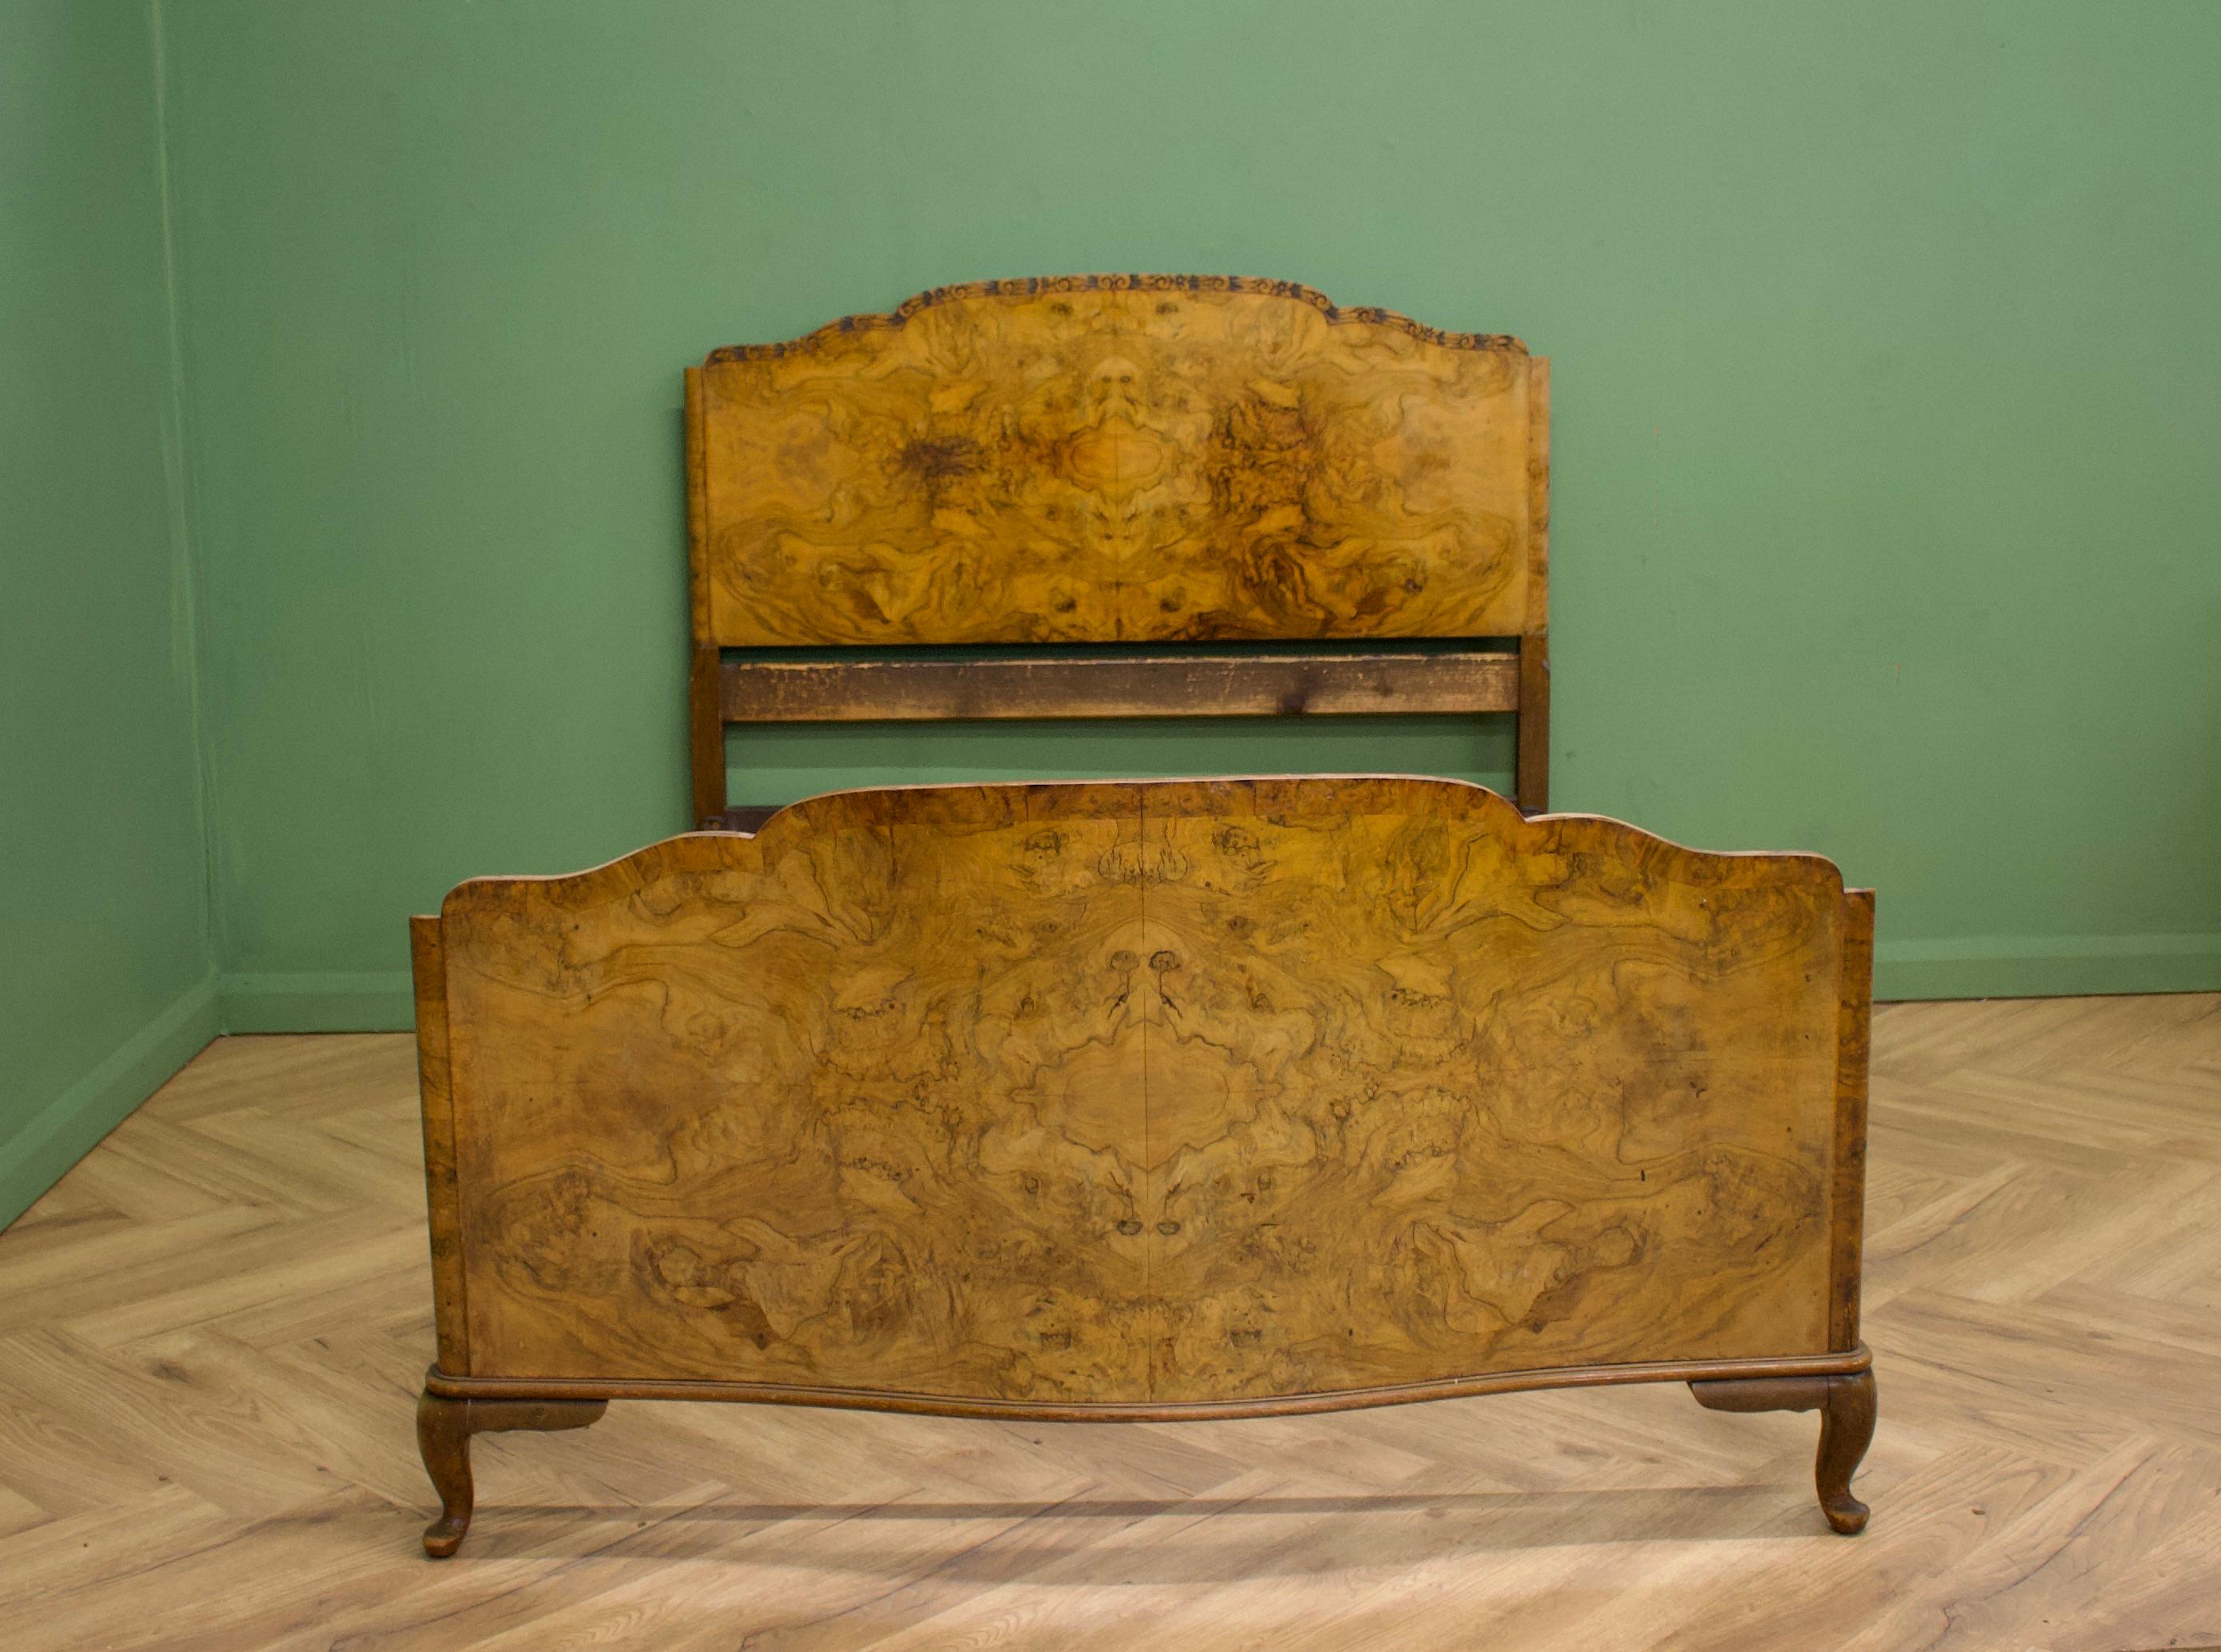 British Art Deco Burr Walnut Double Bed Frame, 1930s In Good Condition For Sale In South Shields, GB